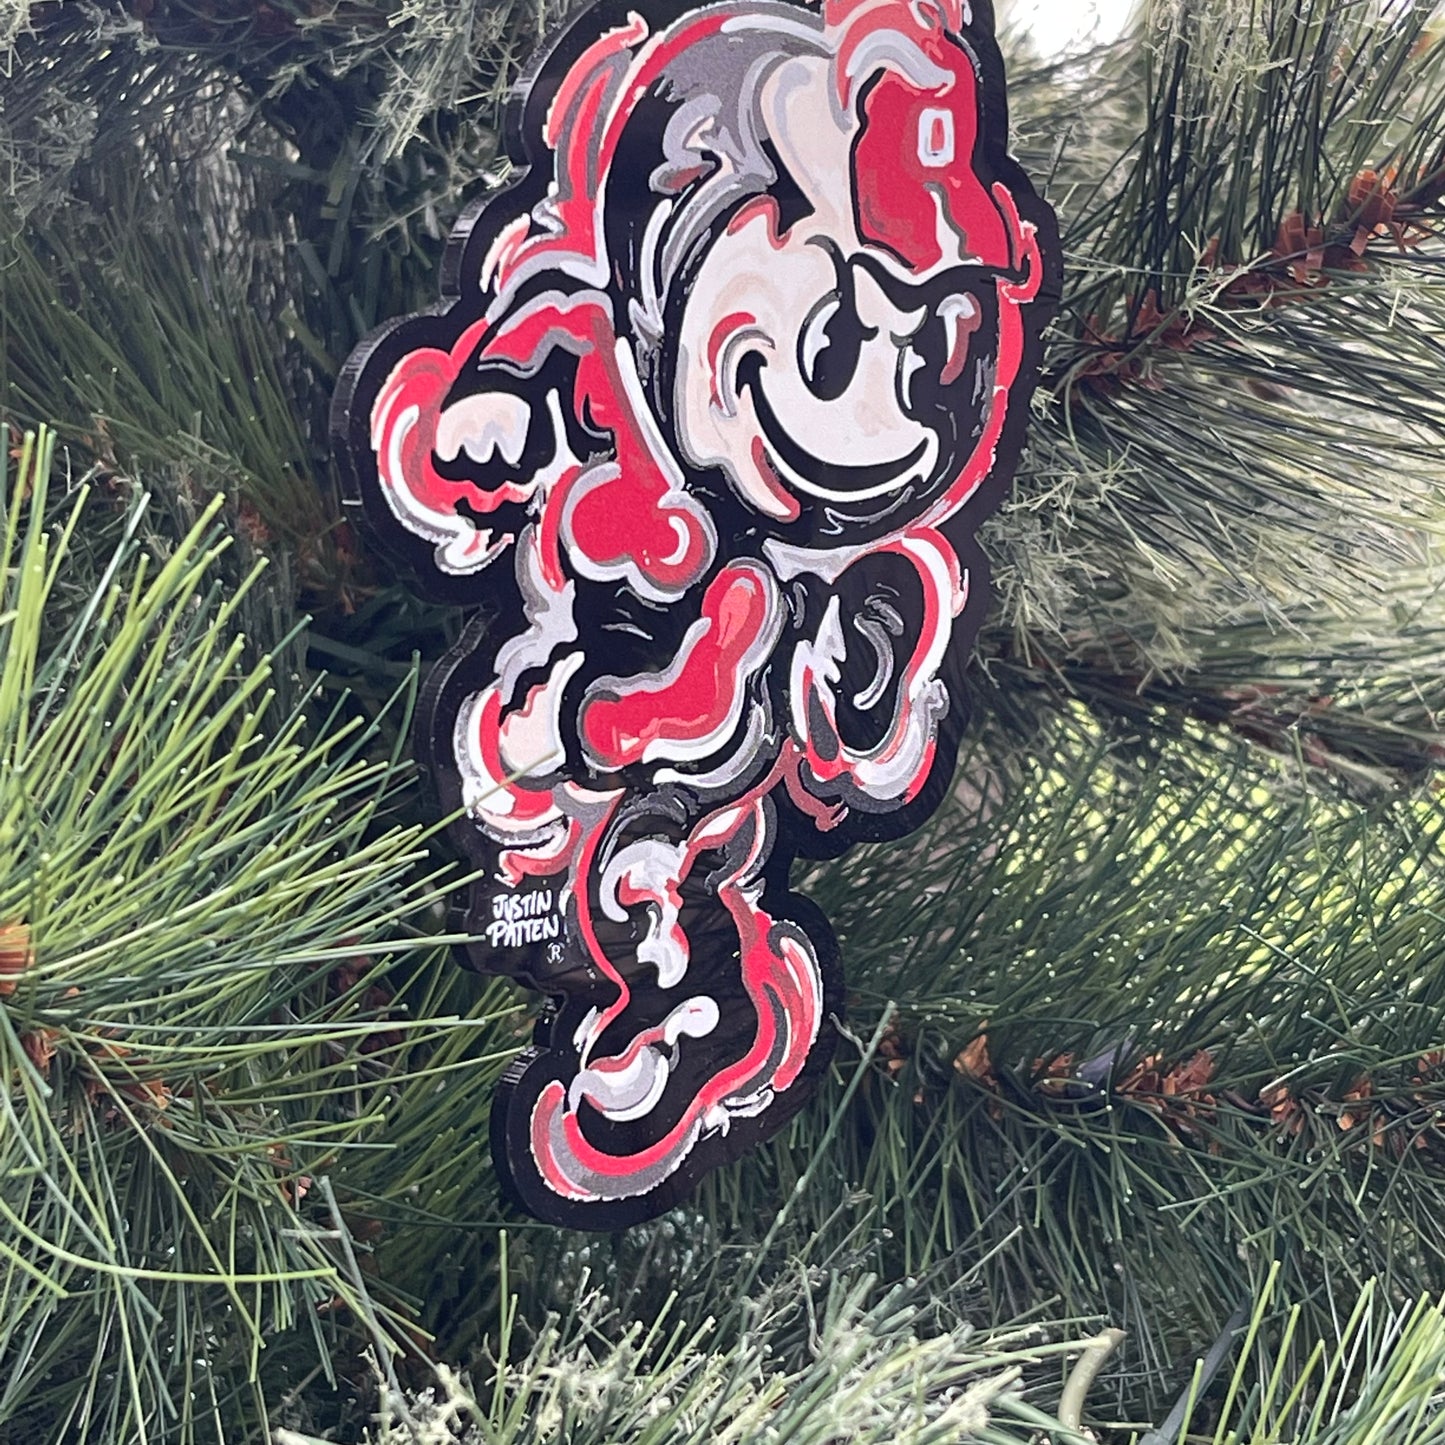 The Ohio State University Vintage Brutus Ornament by Justin Patten